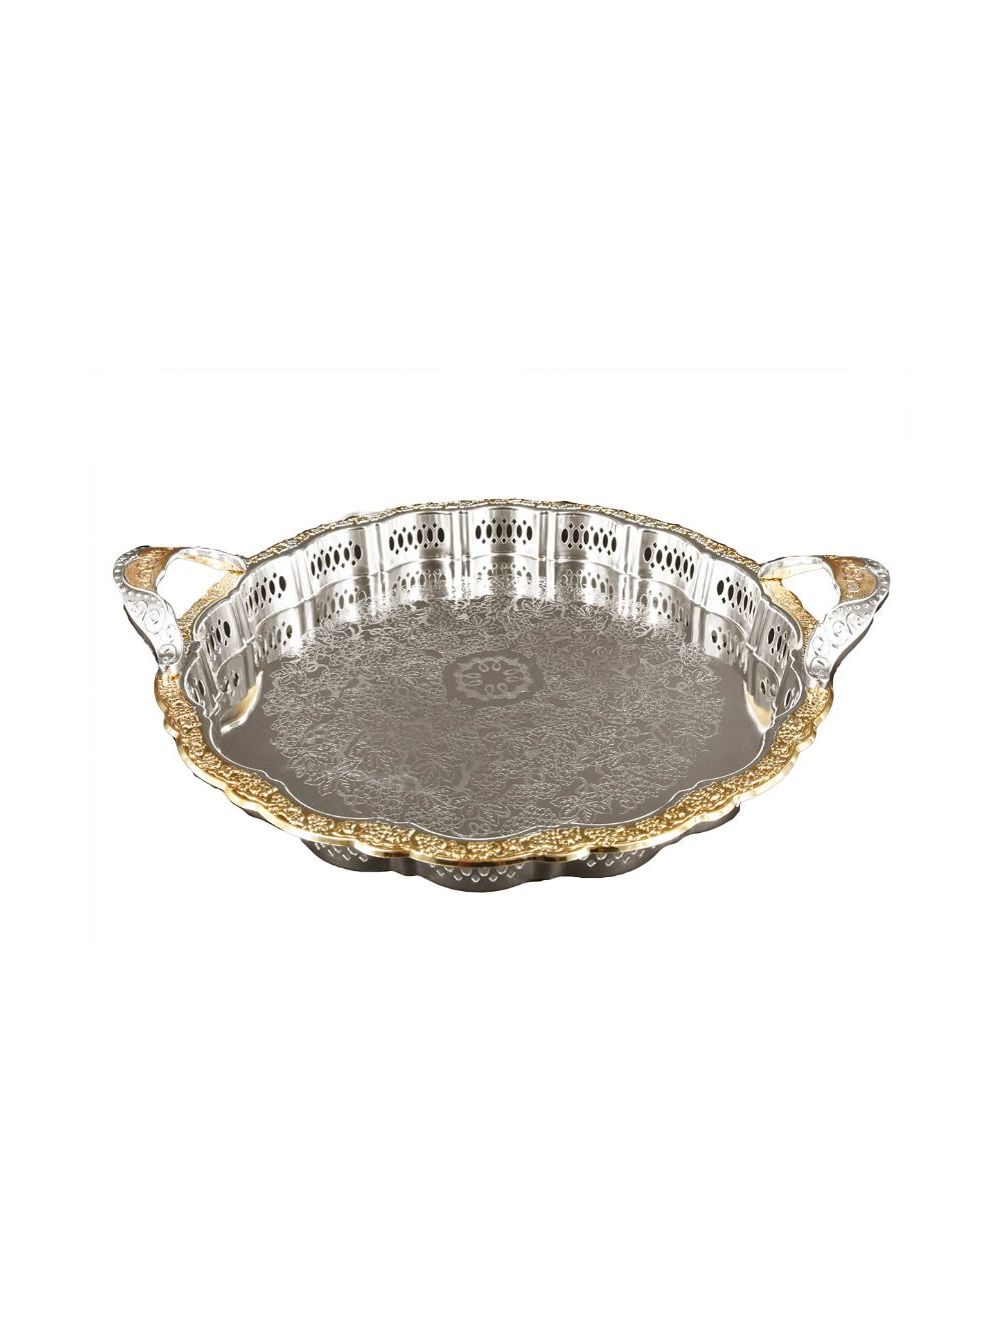 Tray Gold and Silver Plated Round Design